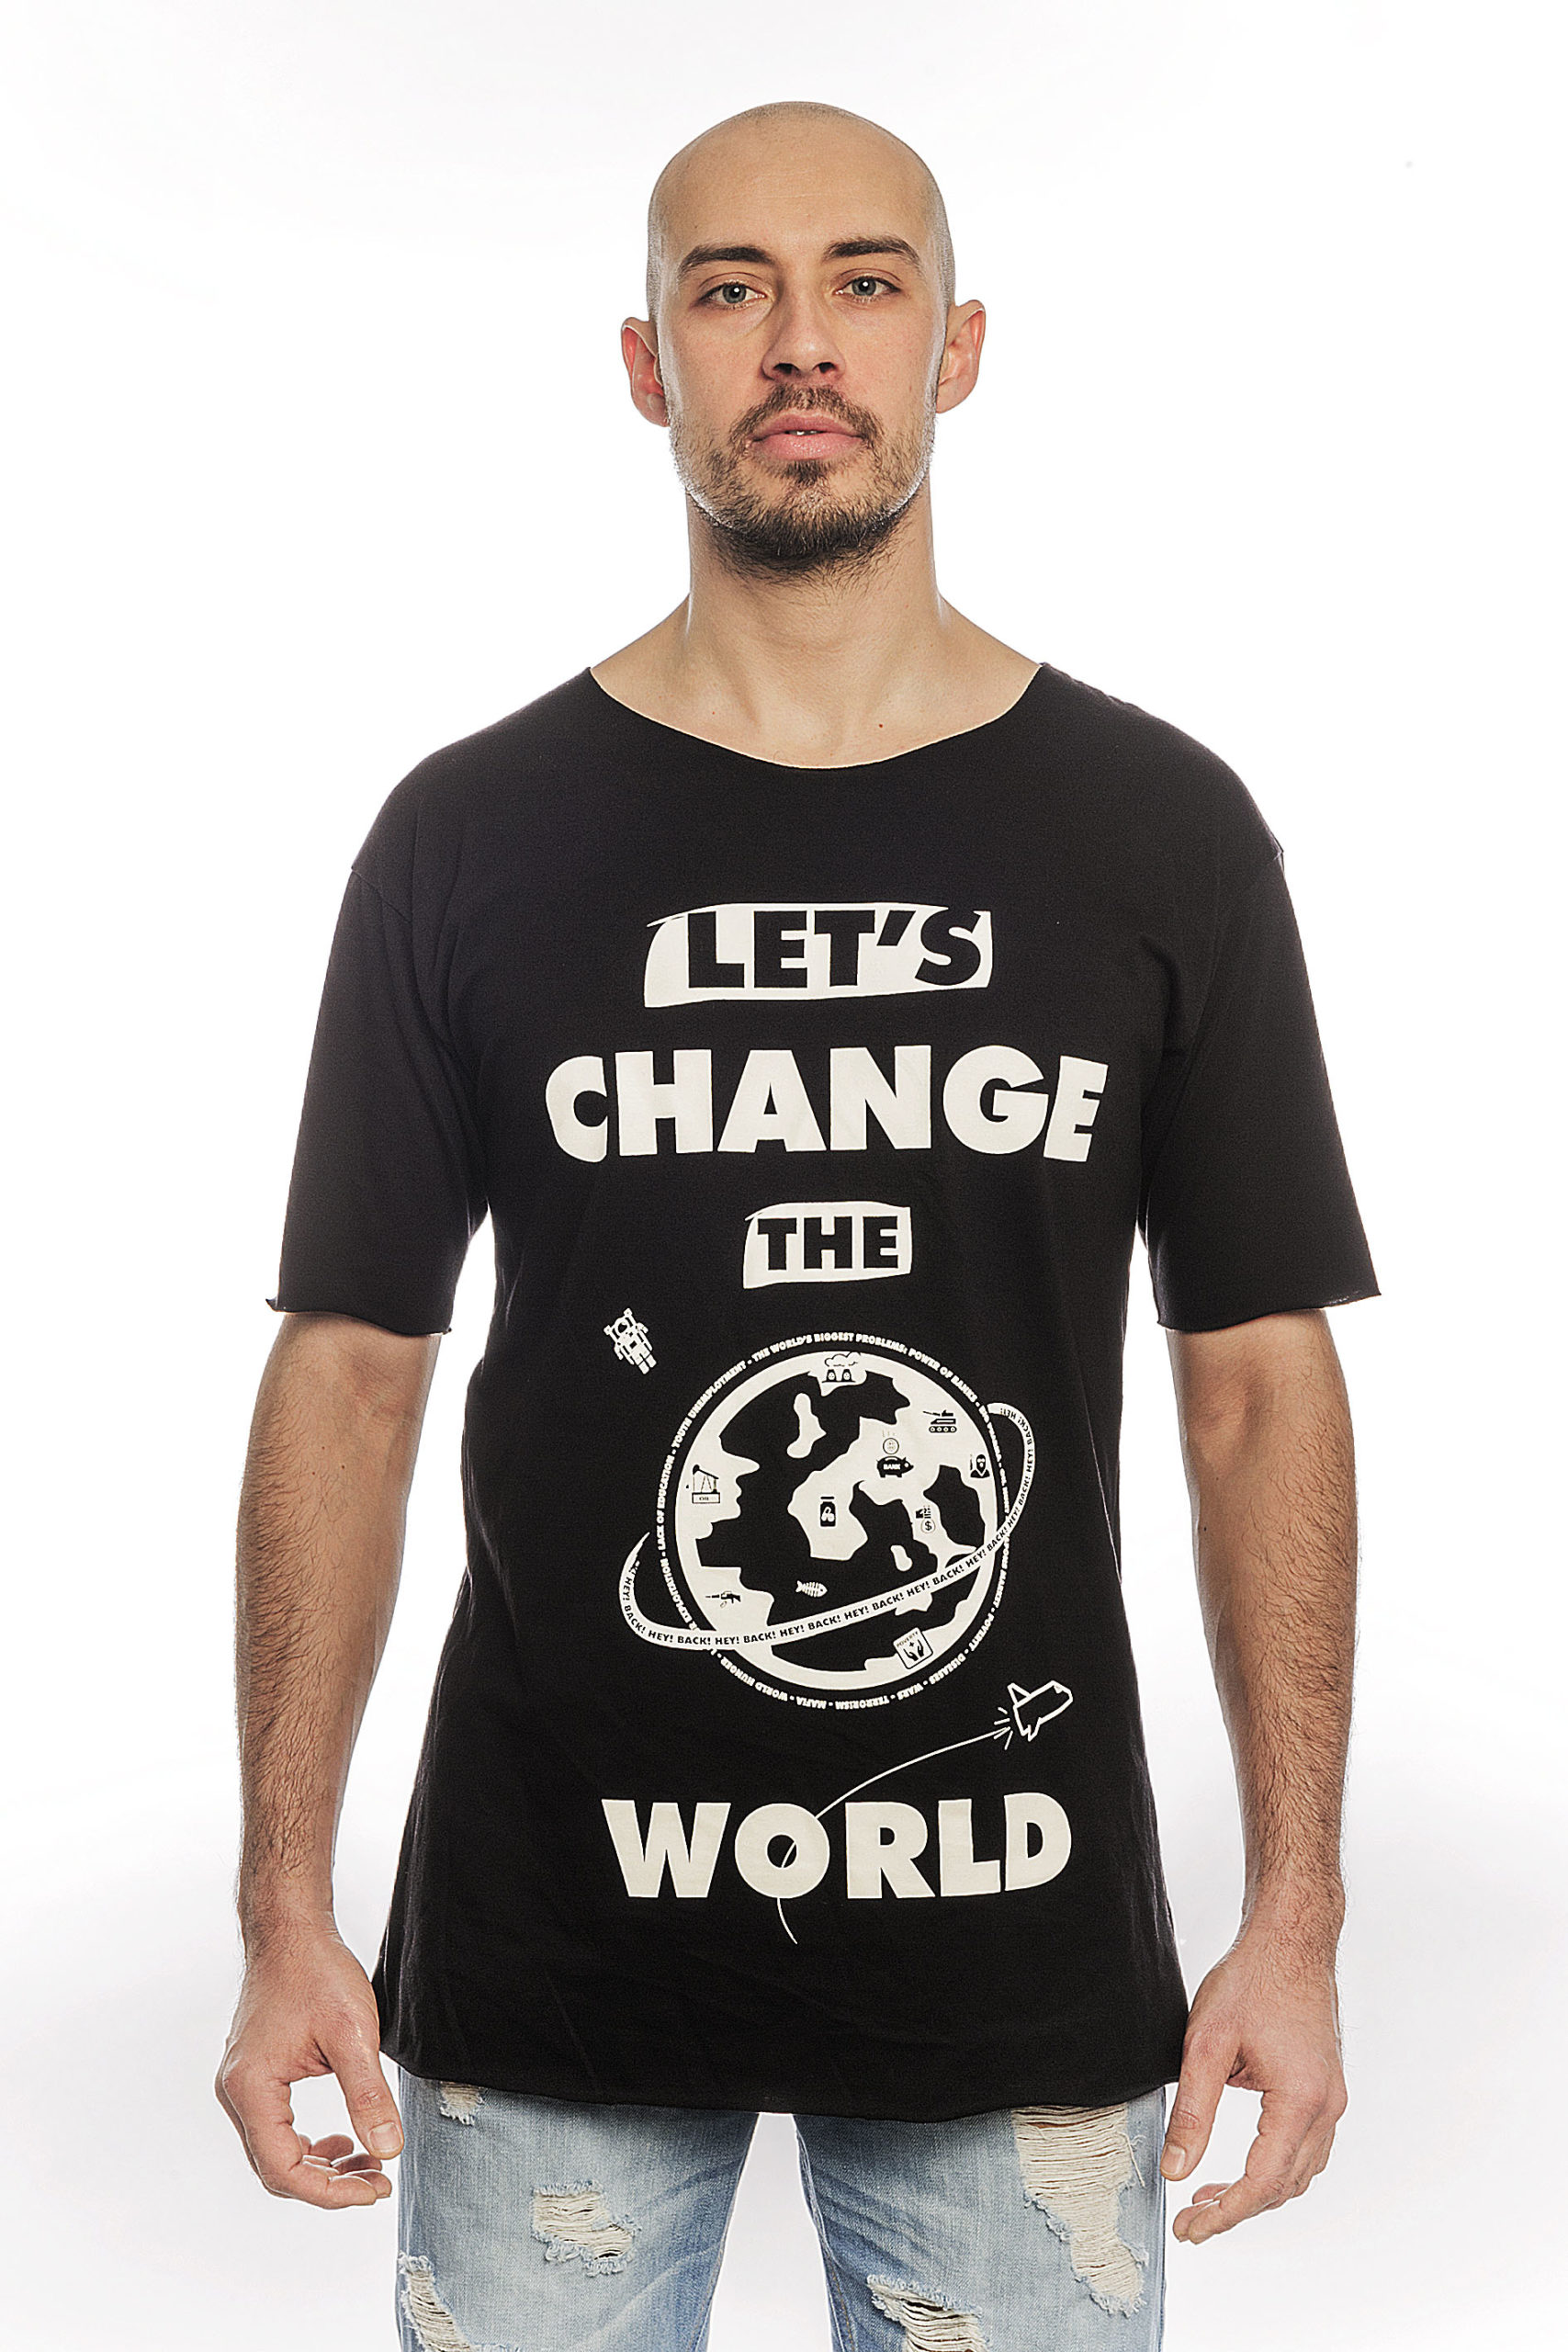 – CHANGE THE WORLD – LONGLINE T-SHIRT HEY! BACK! SUMMER 2017 COLLECTION